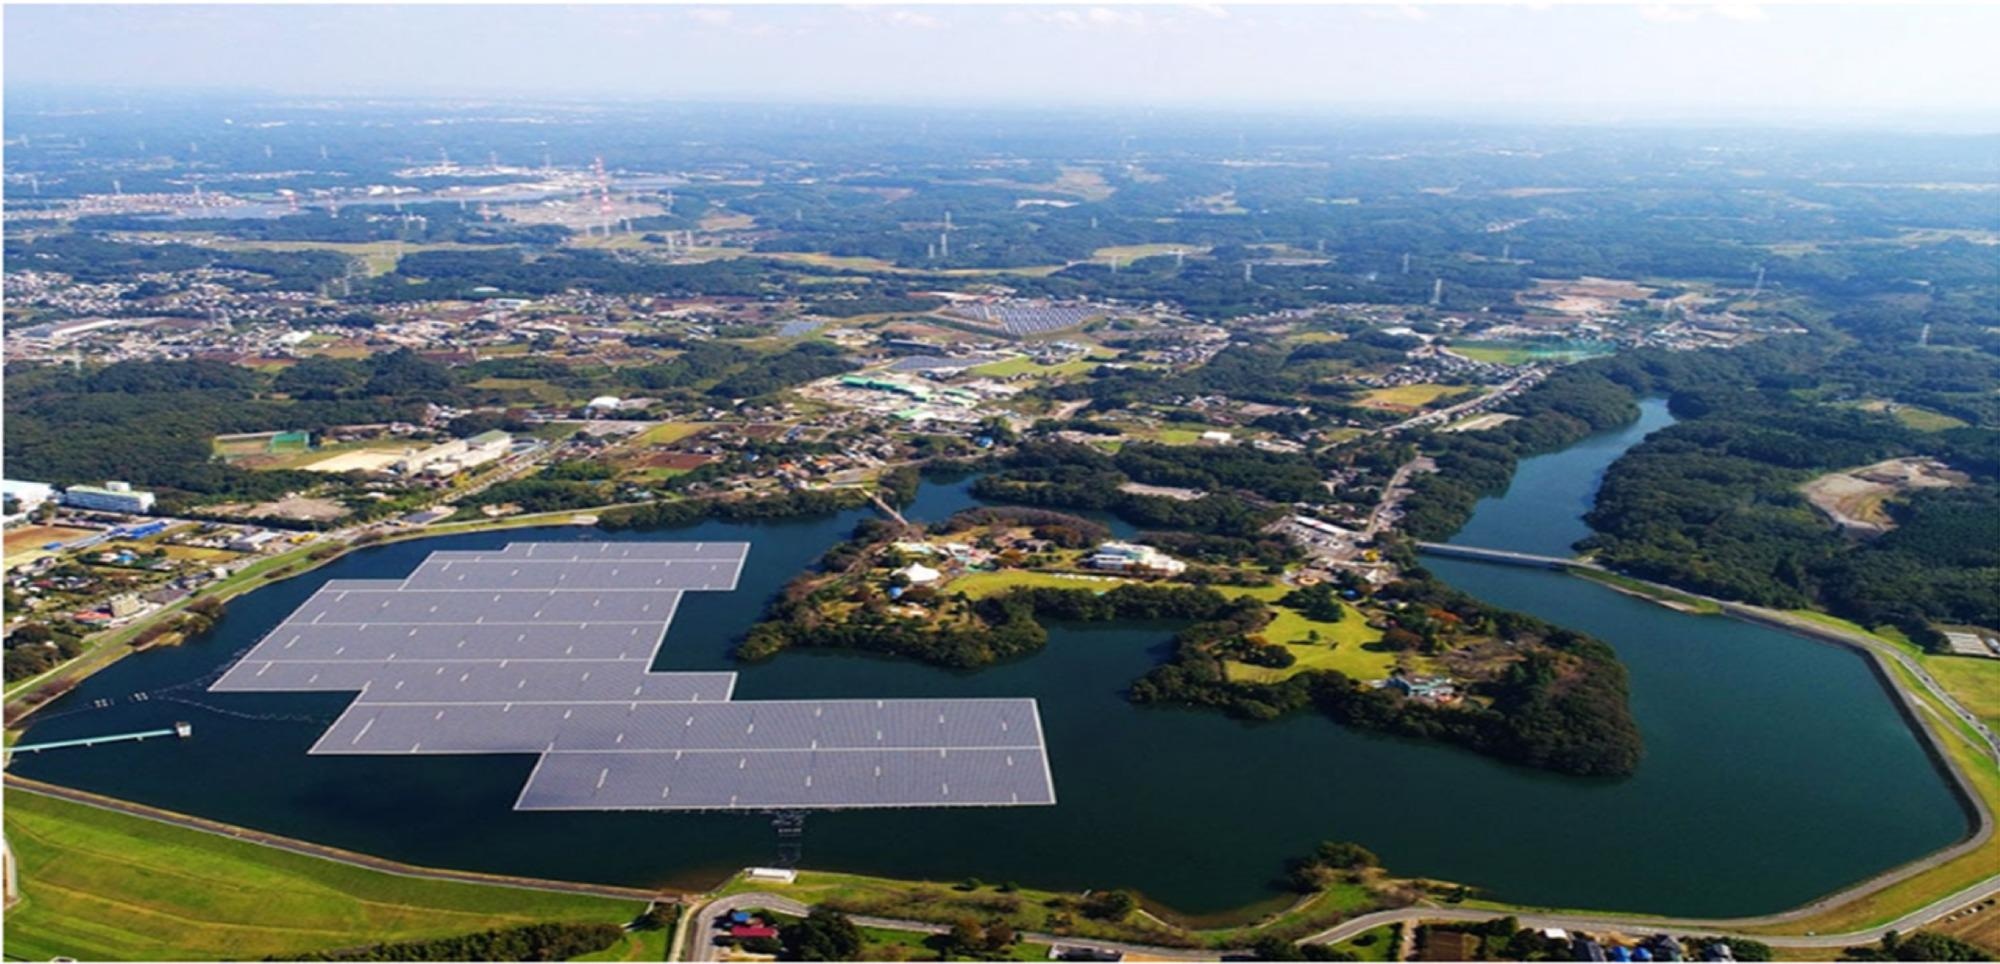 Land-saving by large-scale FPV installation covering the water surface in Japan.